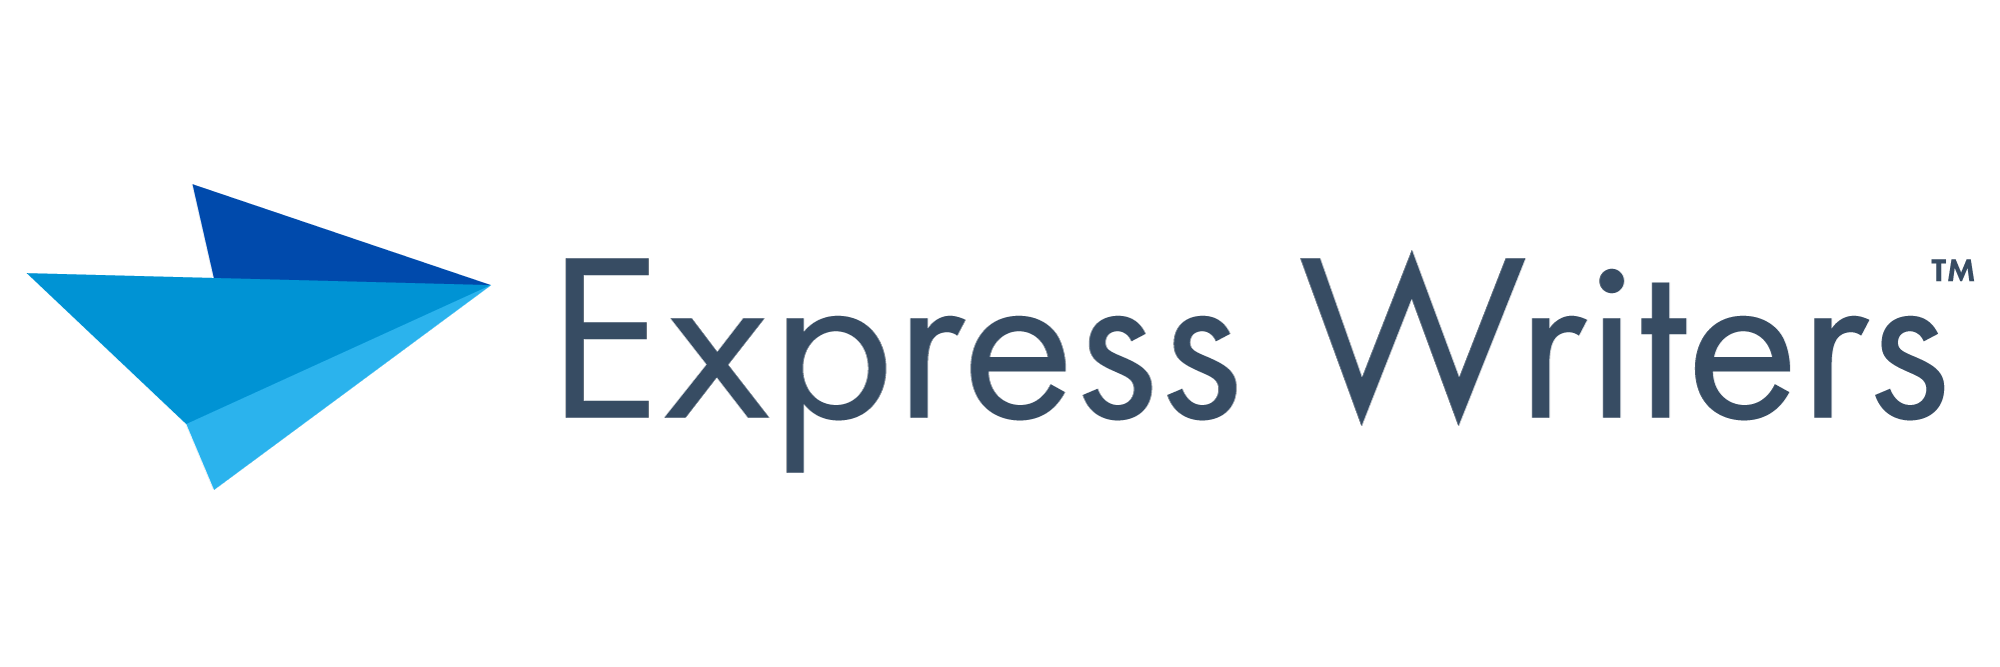 Express Brand Logo - Get Amazing Content | Express Writers, Leading Content Writing Agency